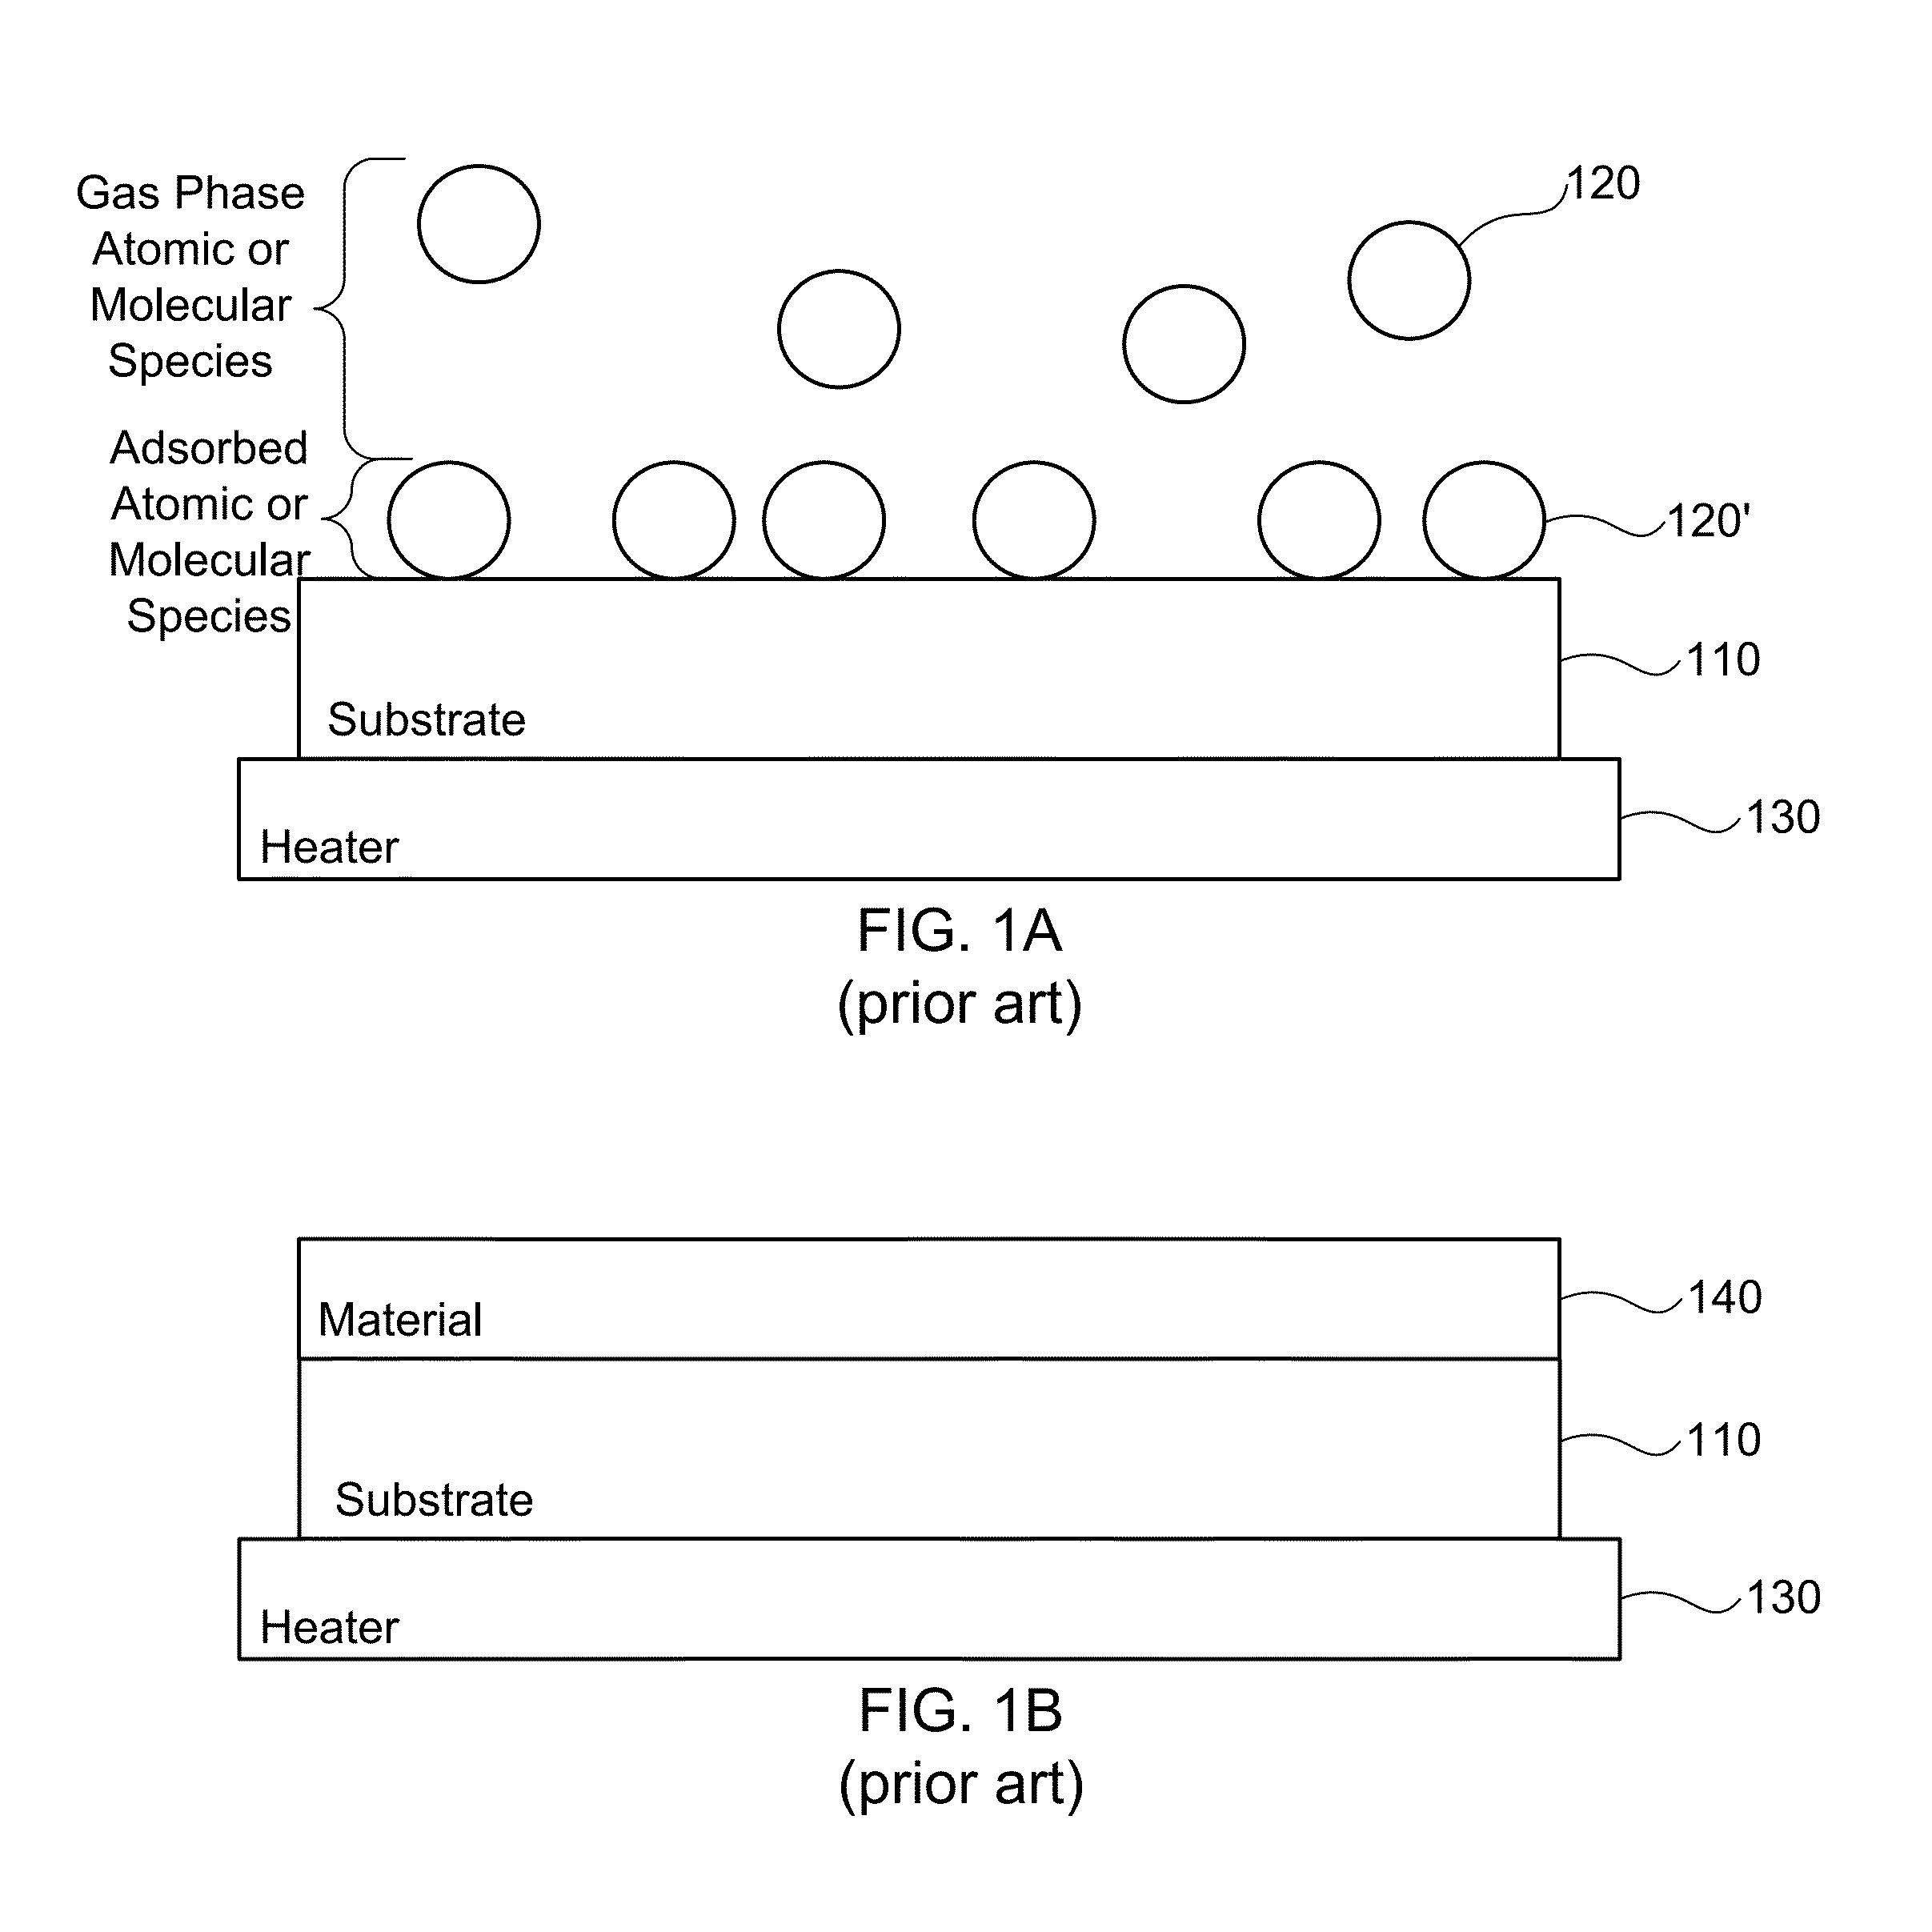 Systems and methods for enhancing mobility of atomic or molecular species on a substrate at reduced bulk temperature using acoustic waves, and structures formed using same